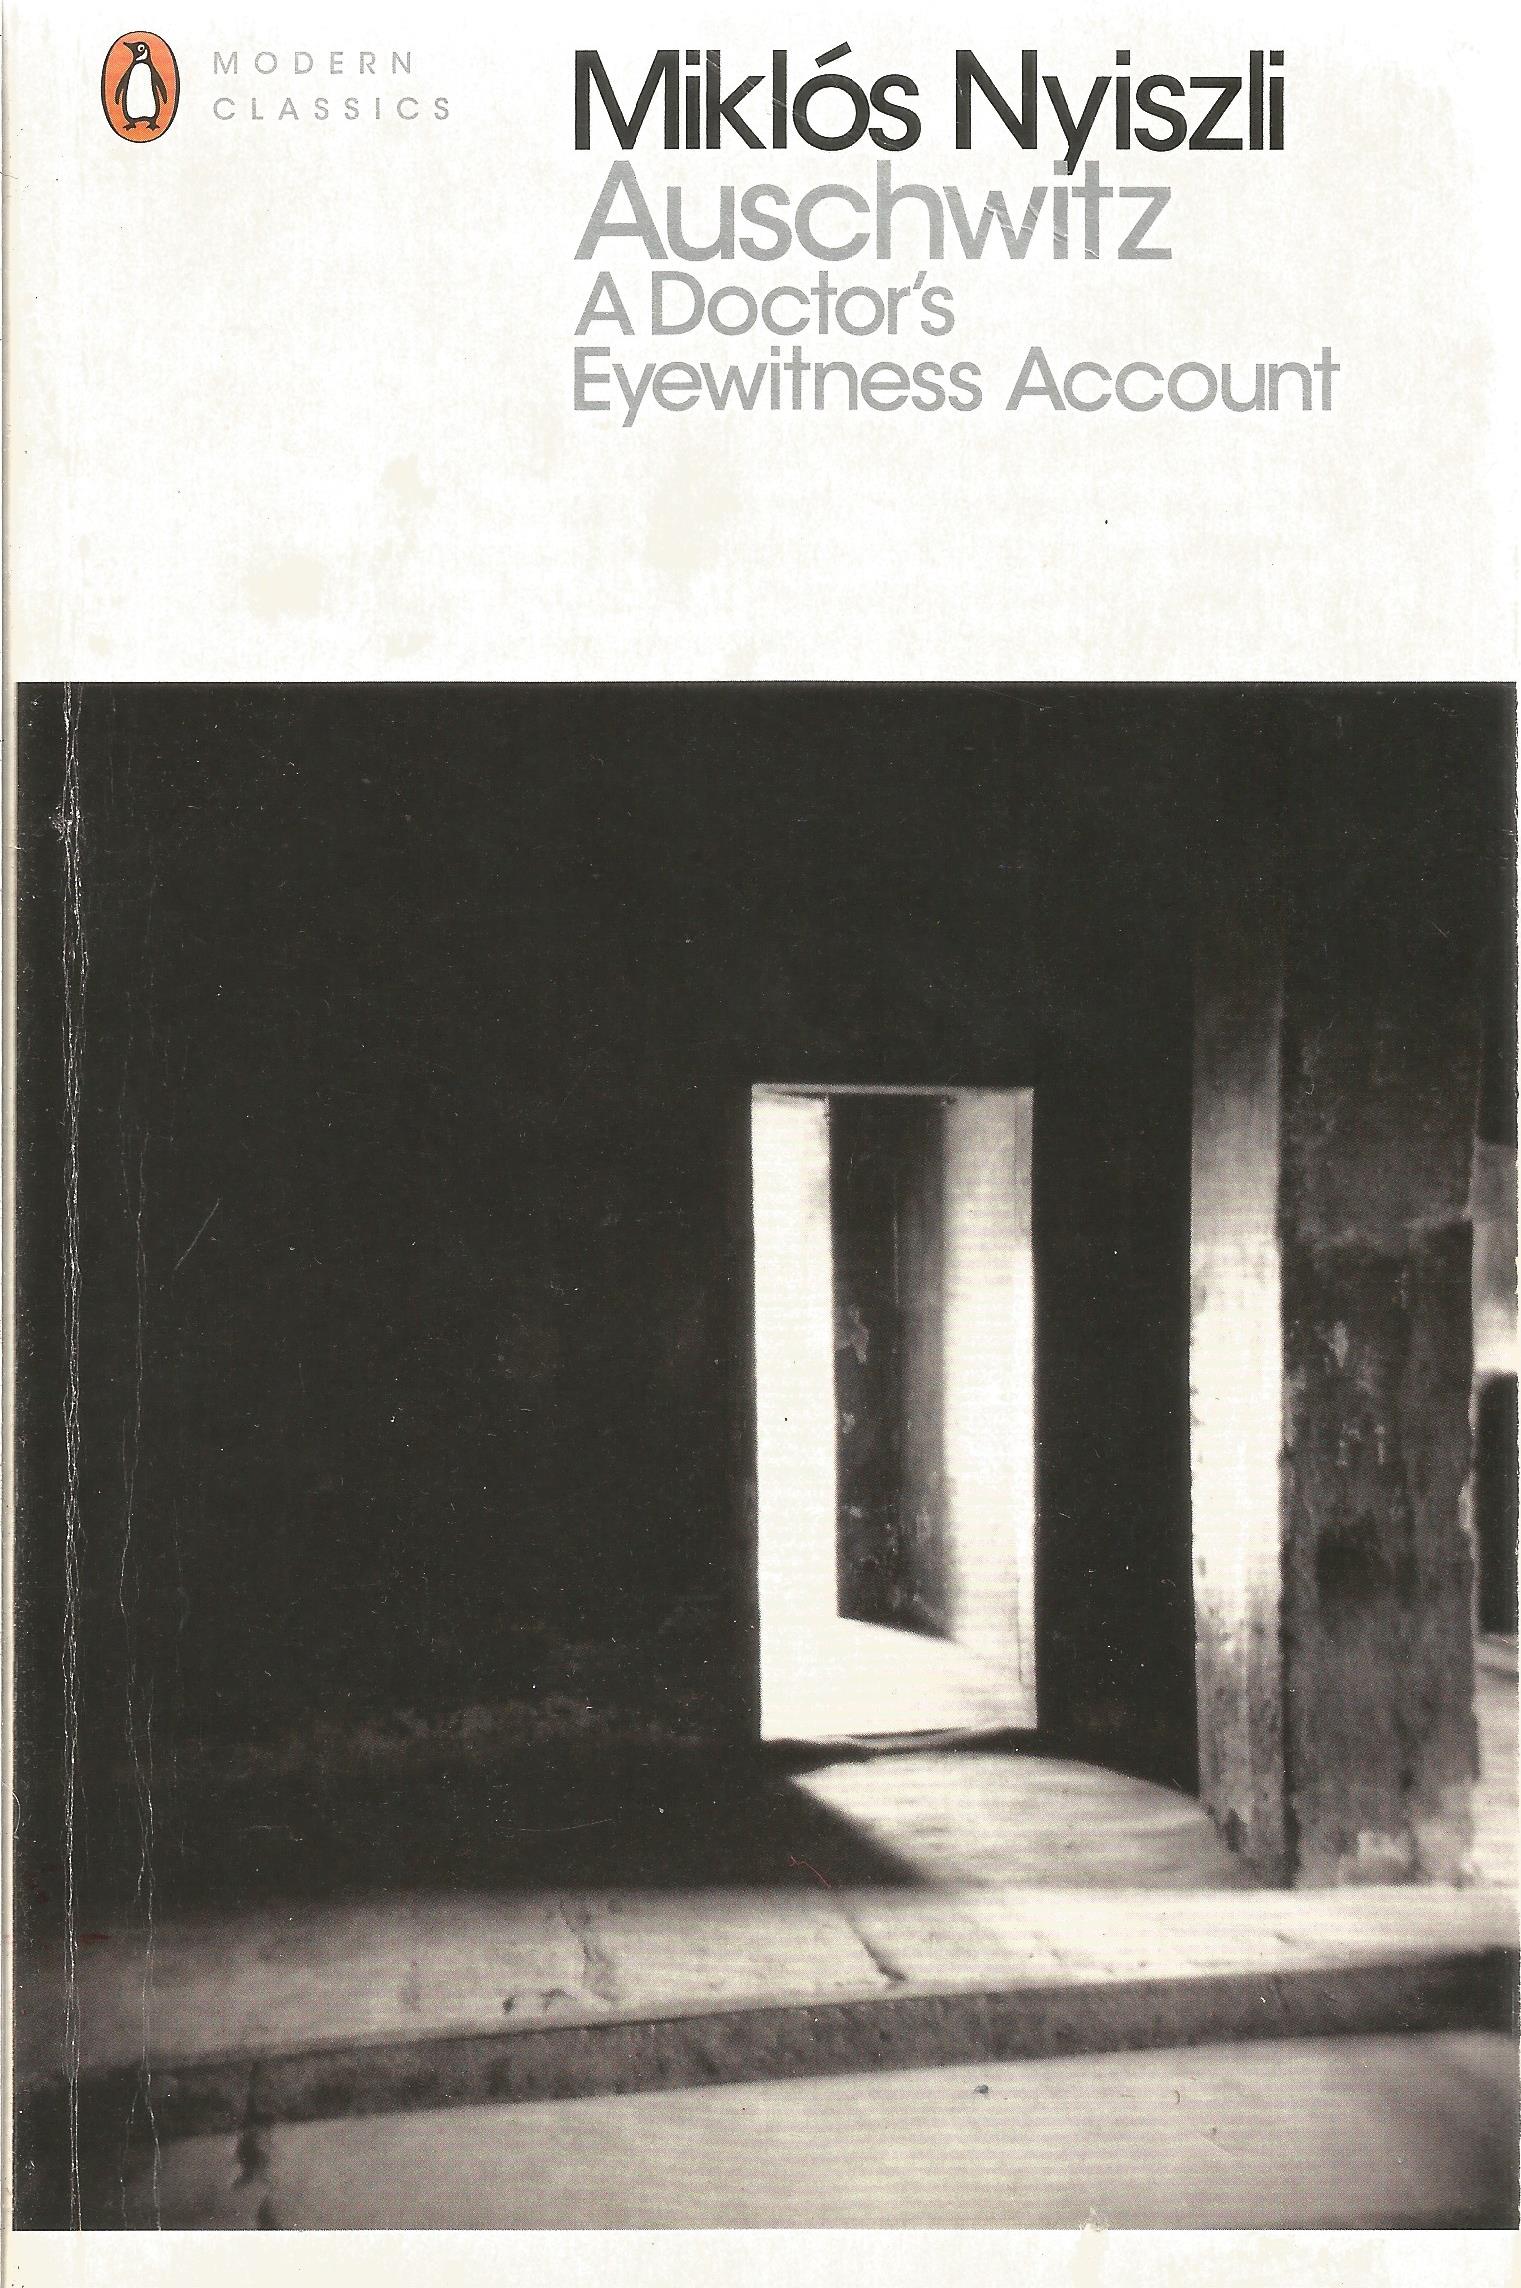 Auschwitz A Doctor's Eyewitness Account by Dr Miklos Nyiszli 1960 Softback Book published by Penguin